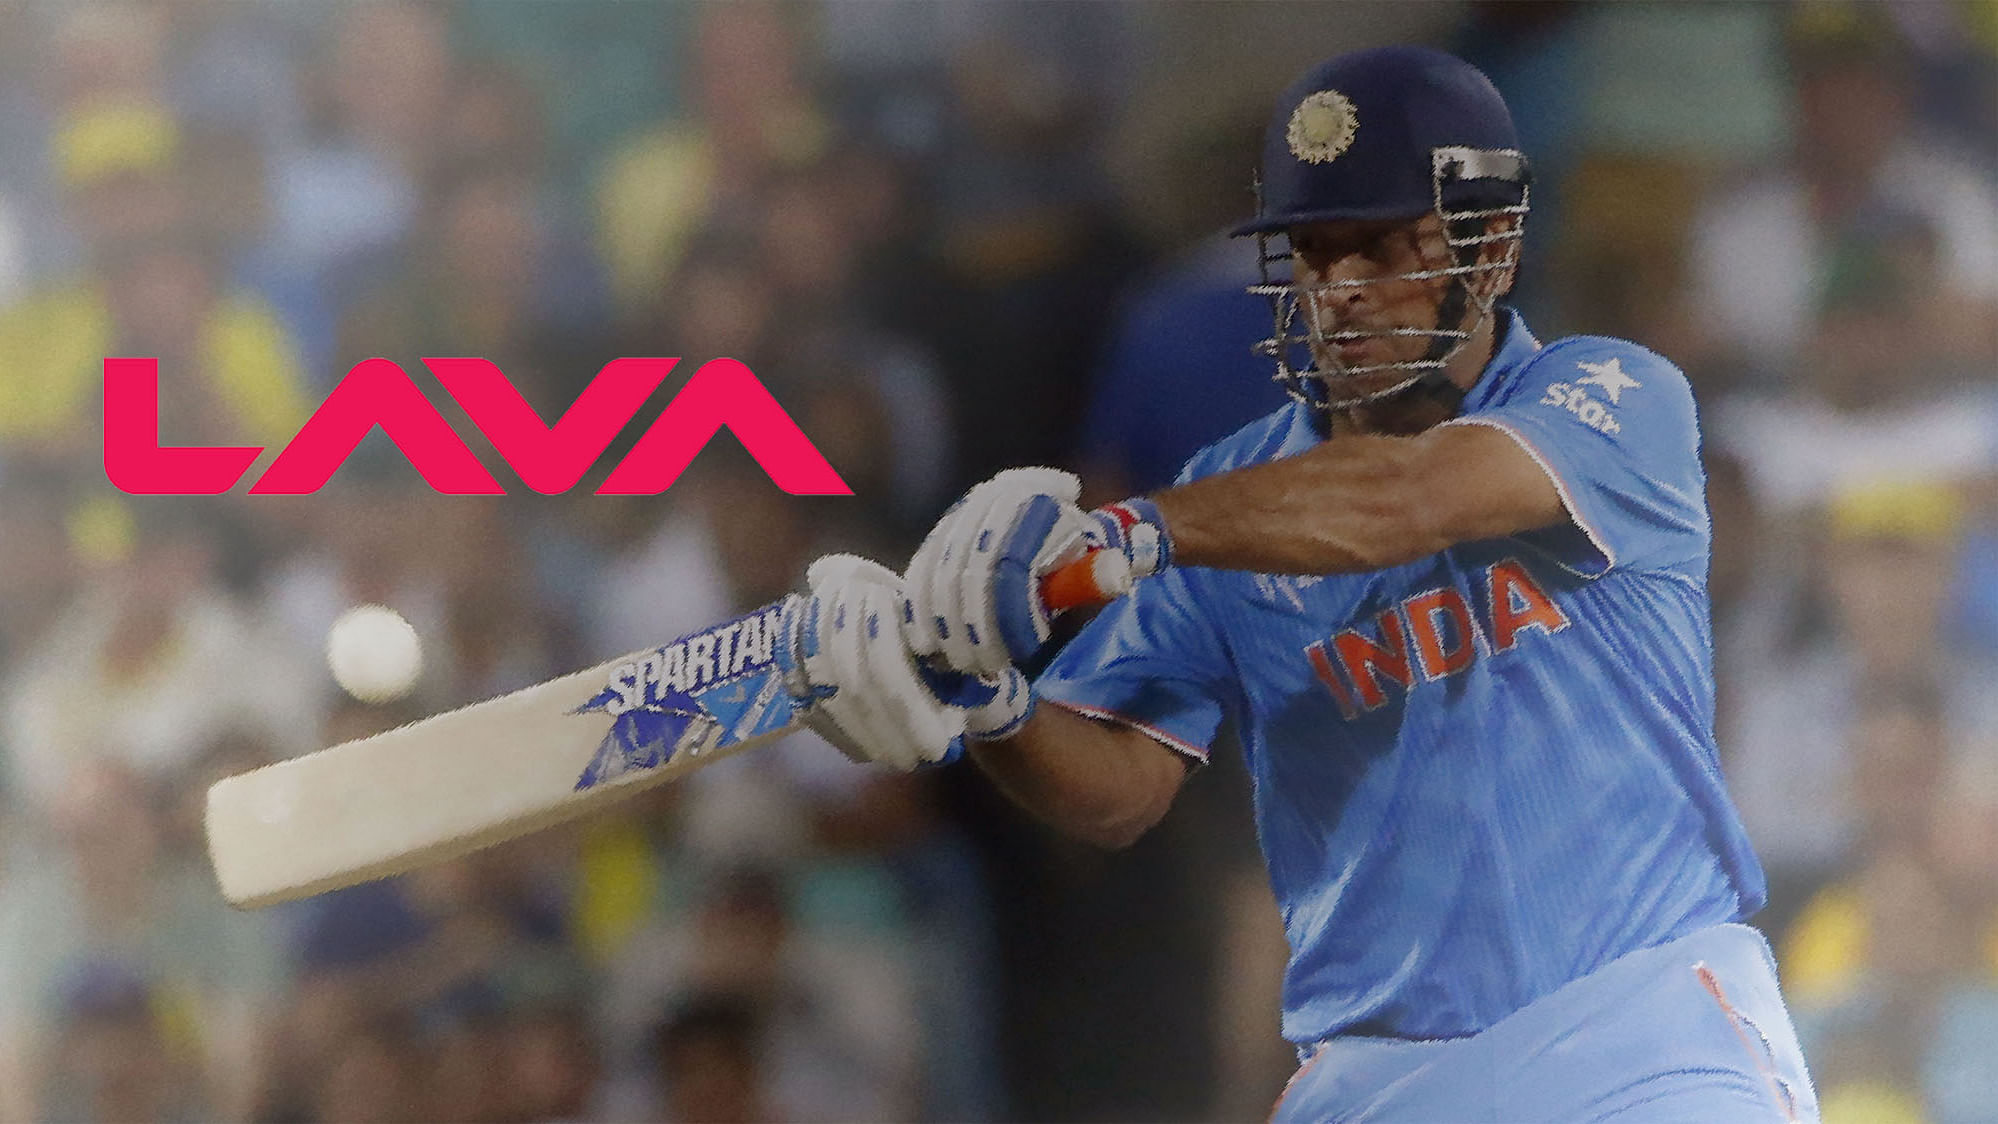 India’s ODI cricket team captain will lead Lava’s charge in the market. (Photo: <b>The Quint</b>)